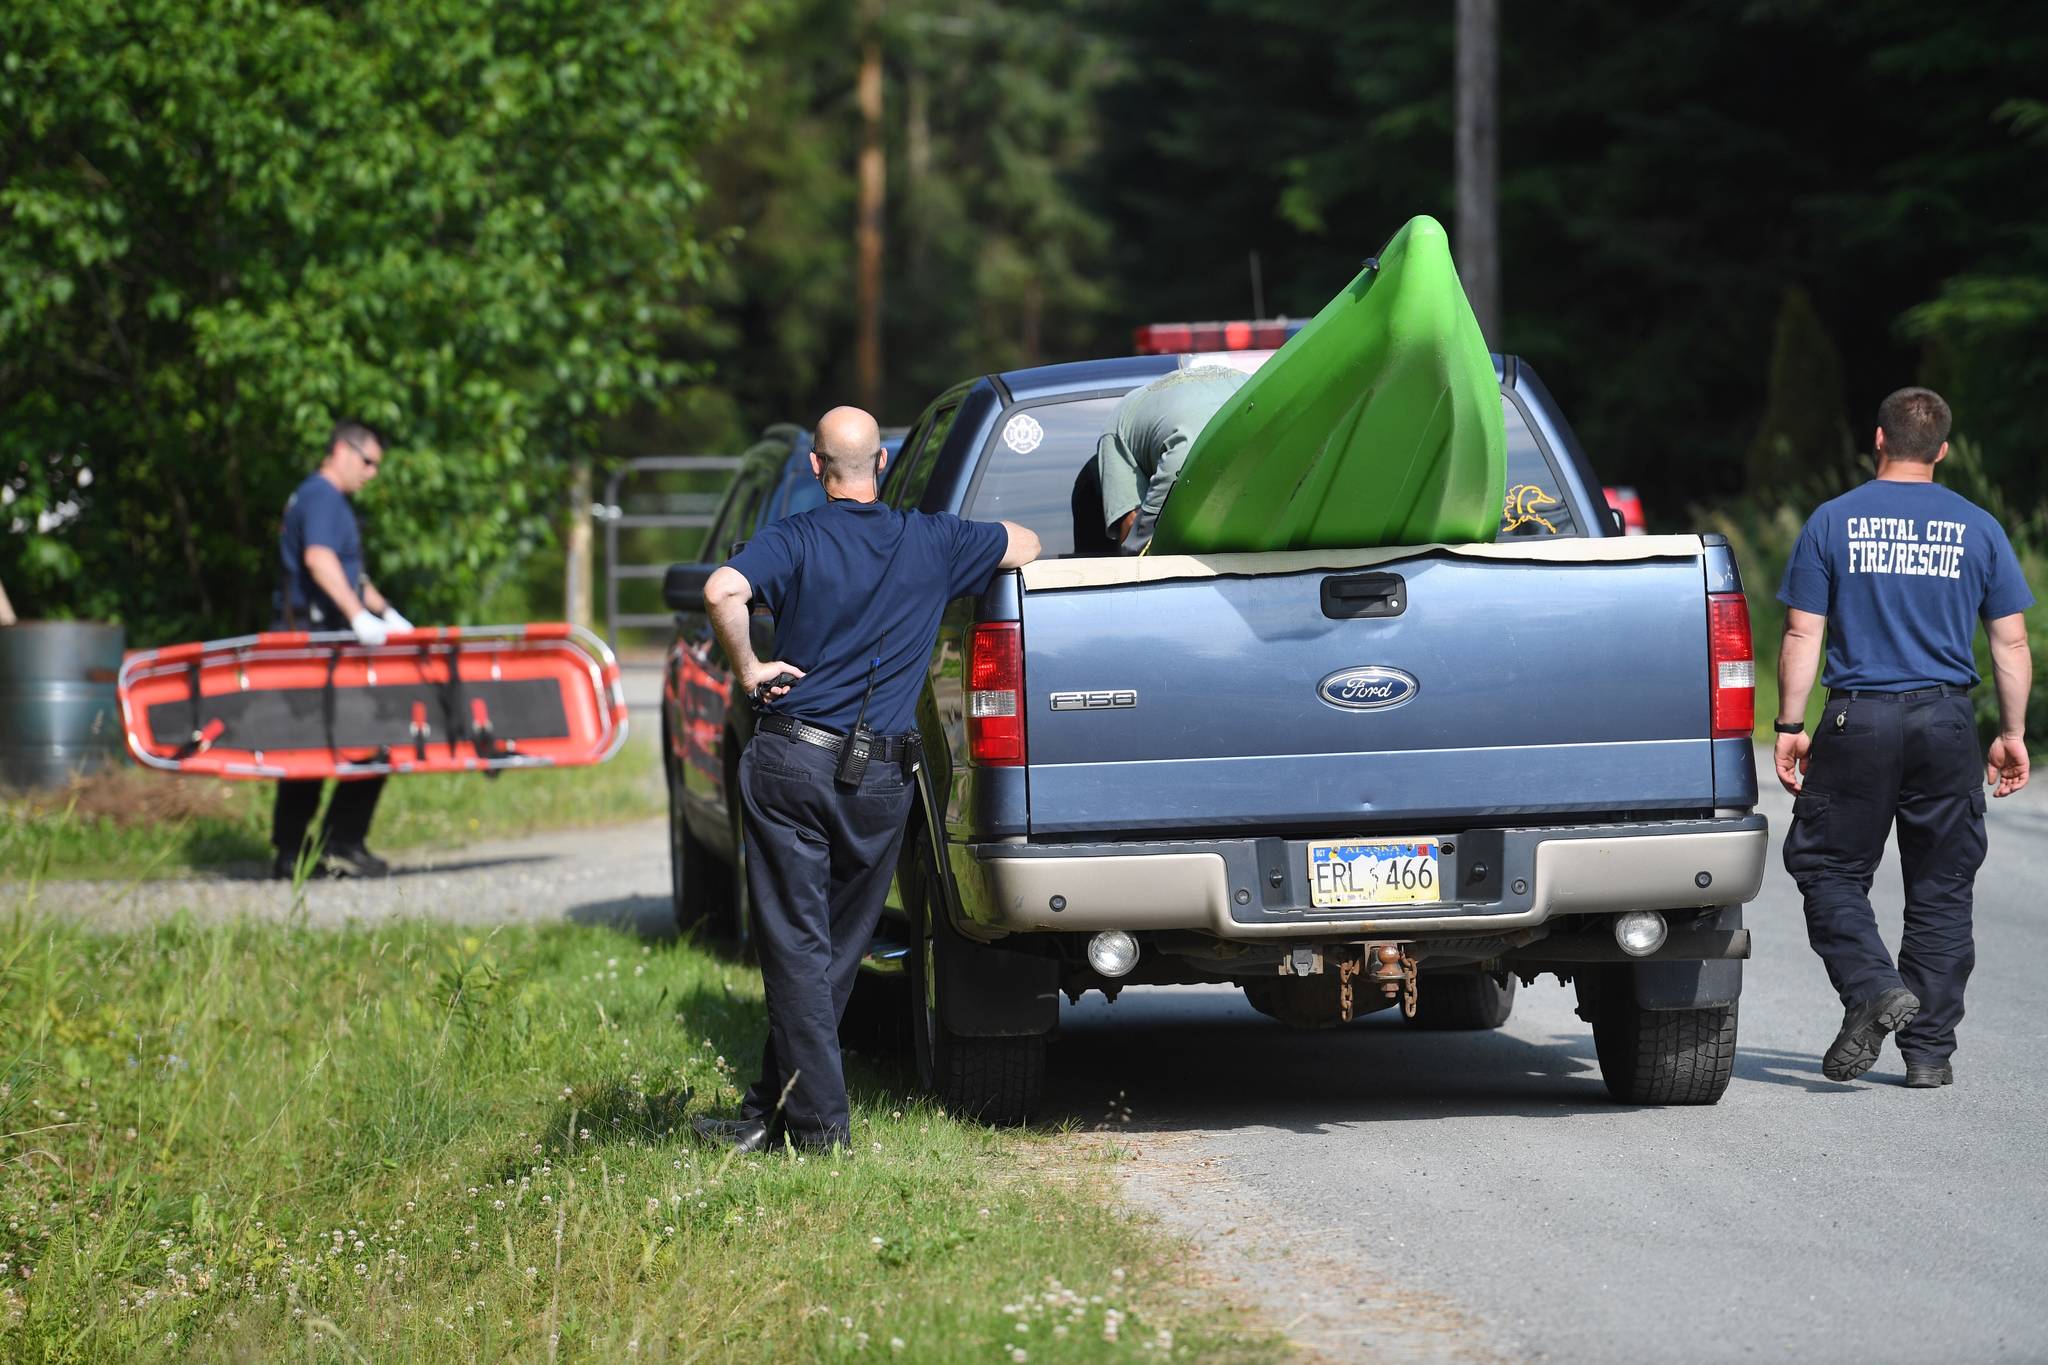 Capital City Fire/Rescue personnel pack up after helping the Juneau Police Department recover a body found in a pond behind 9010 Atlin Drive on Wednesday, July 3, 2019. (Michael Penn | Juneau Empire)